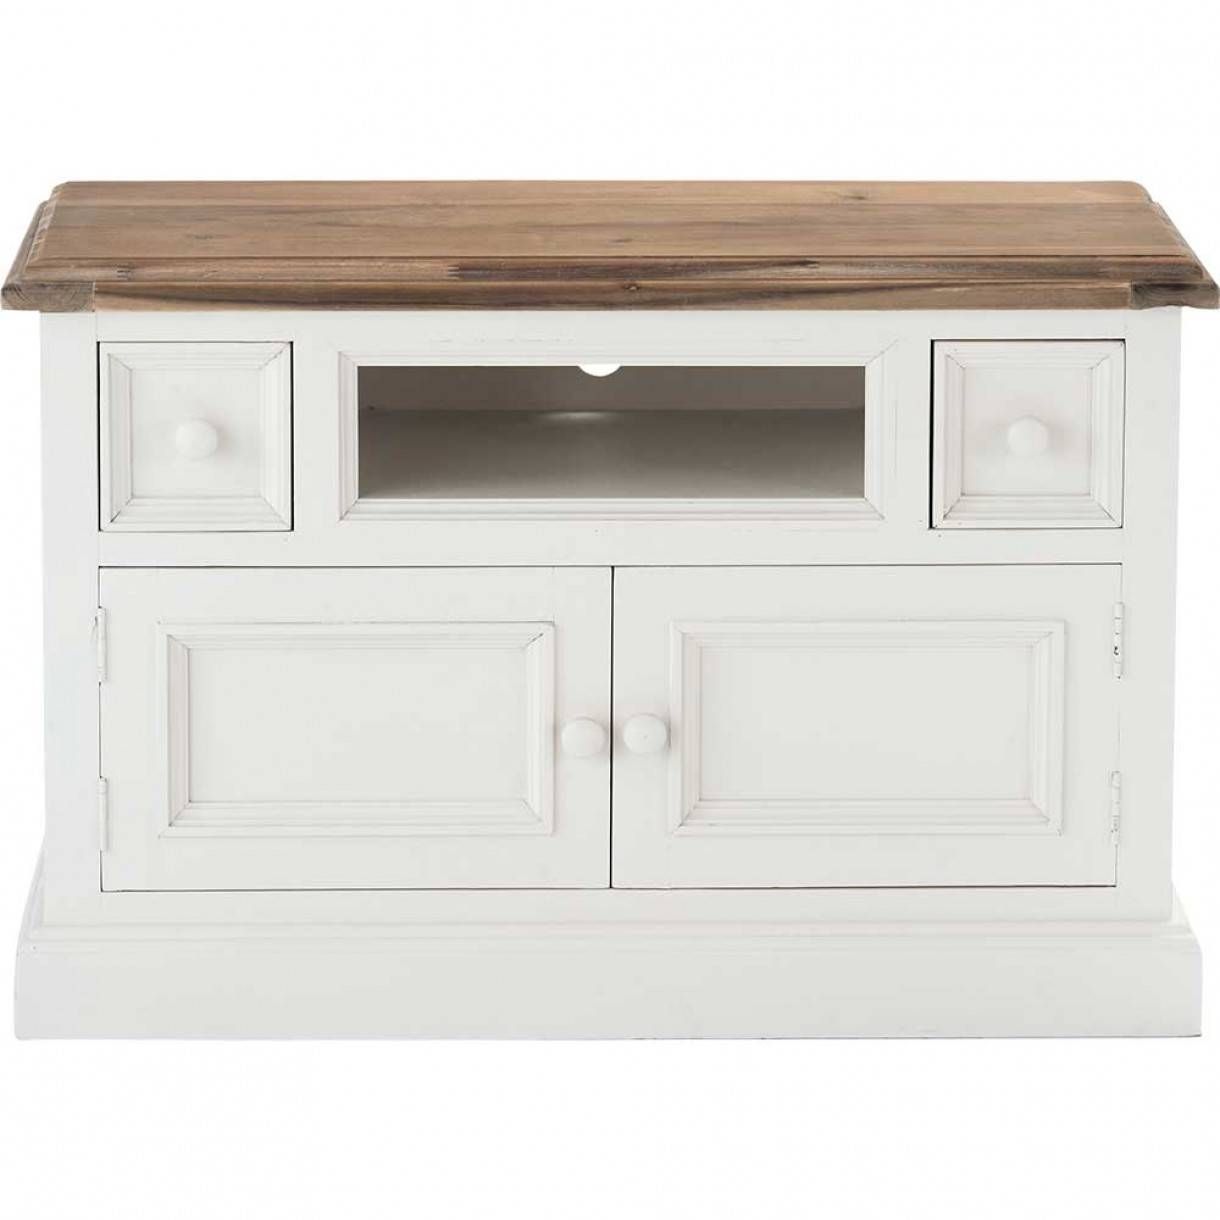 Perfect Small White Tv Cabinet 79 For Best Interior With Small Regarding Small White Tv Cabinets (View 6 of 15)